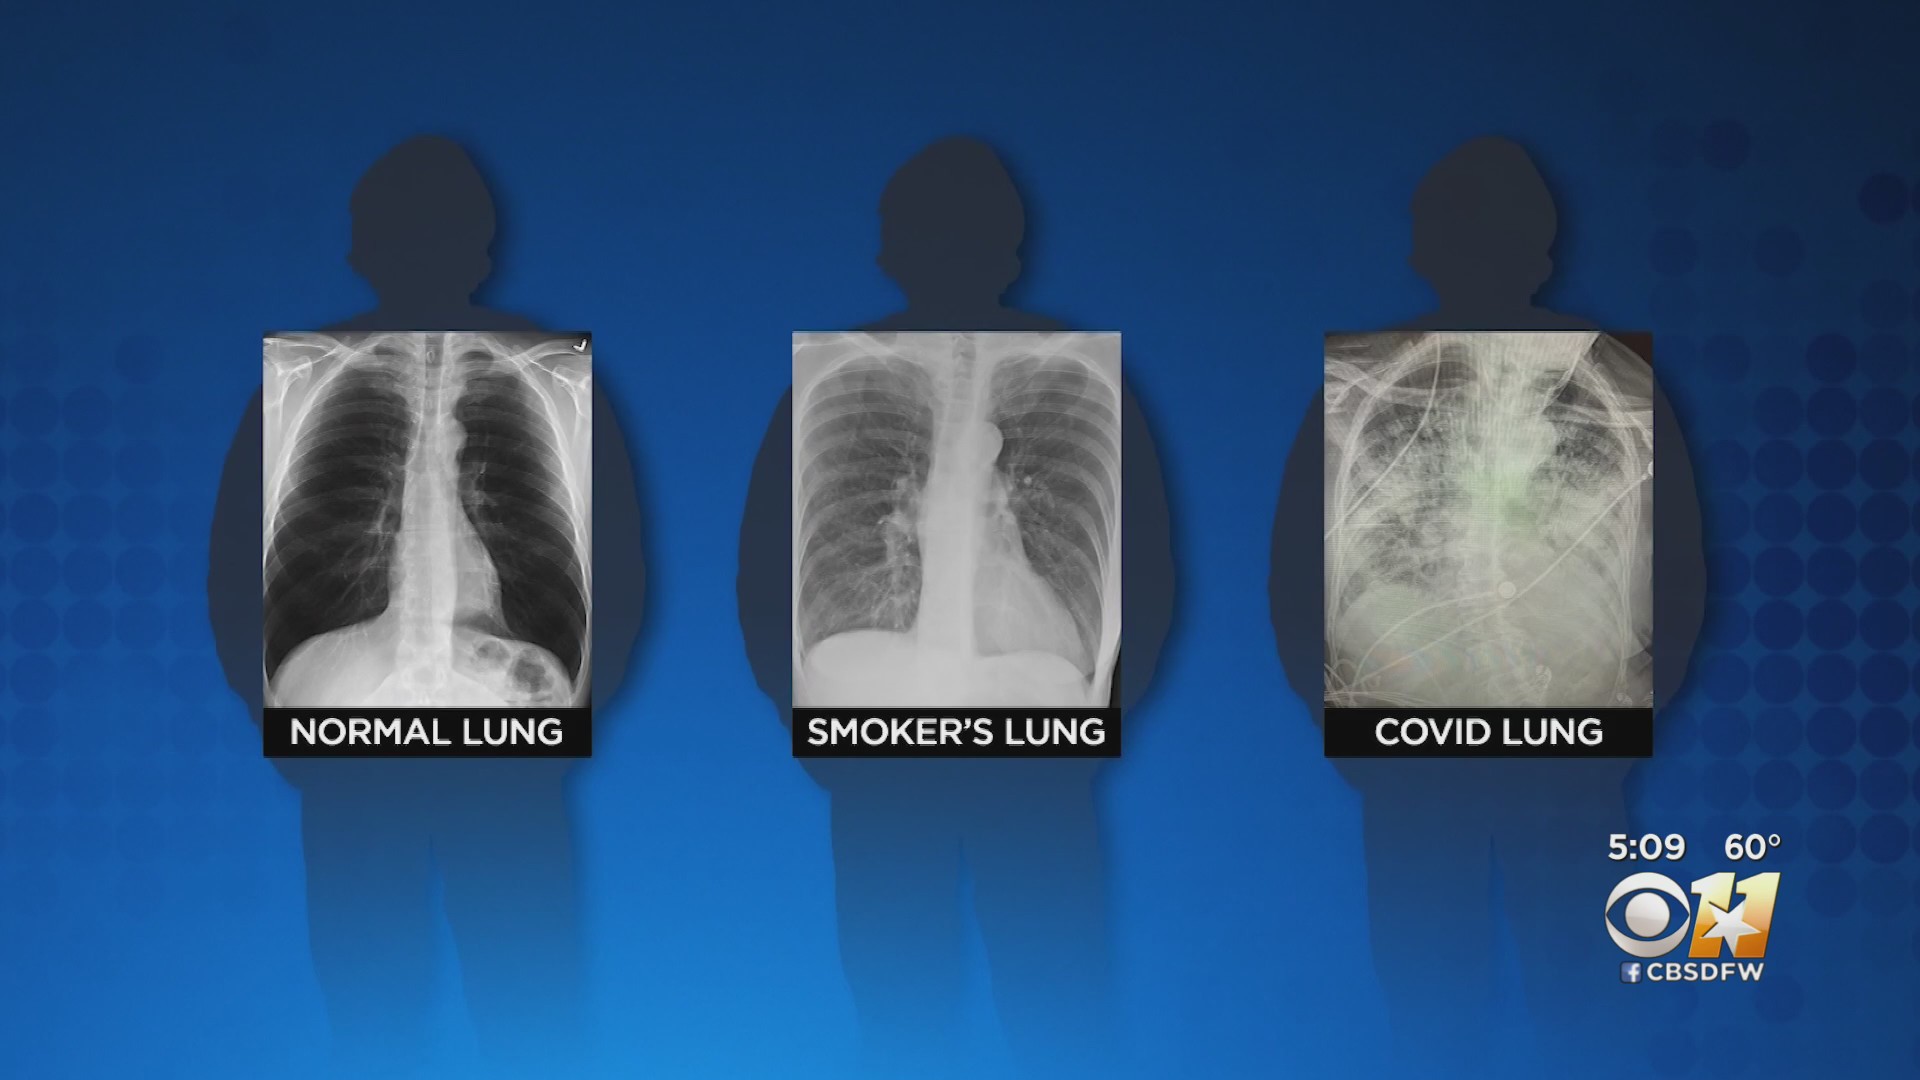 normal chest x ray - Normal Lung Smoker'S Lung Covid Lung 60 Ok Cbsdfw